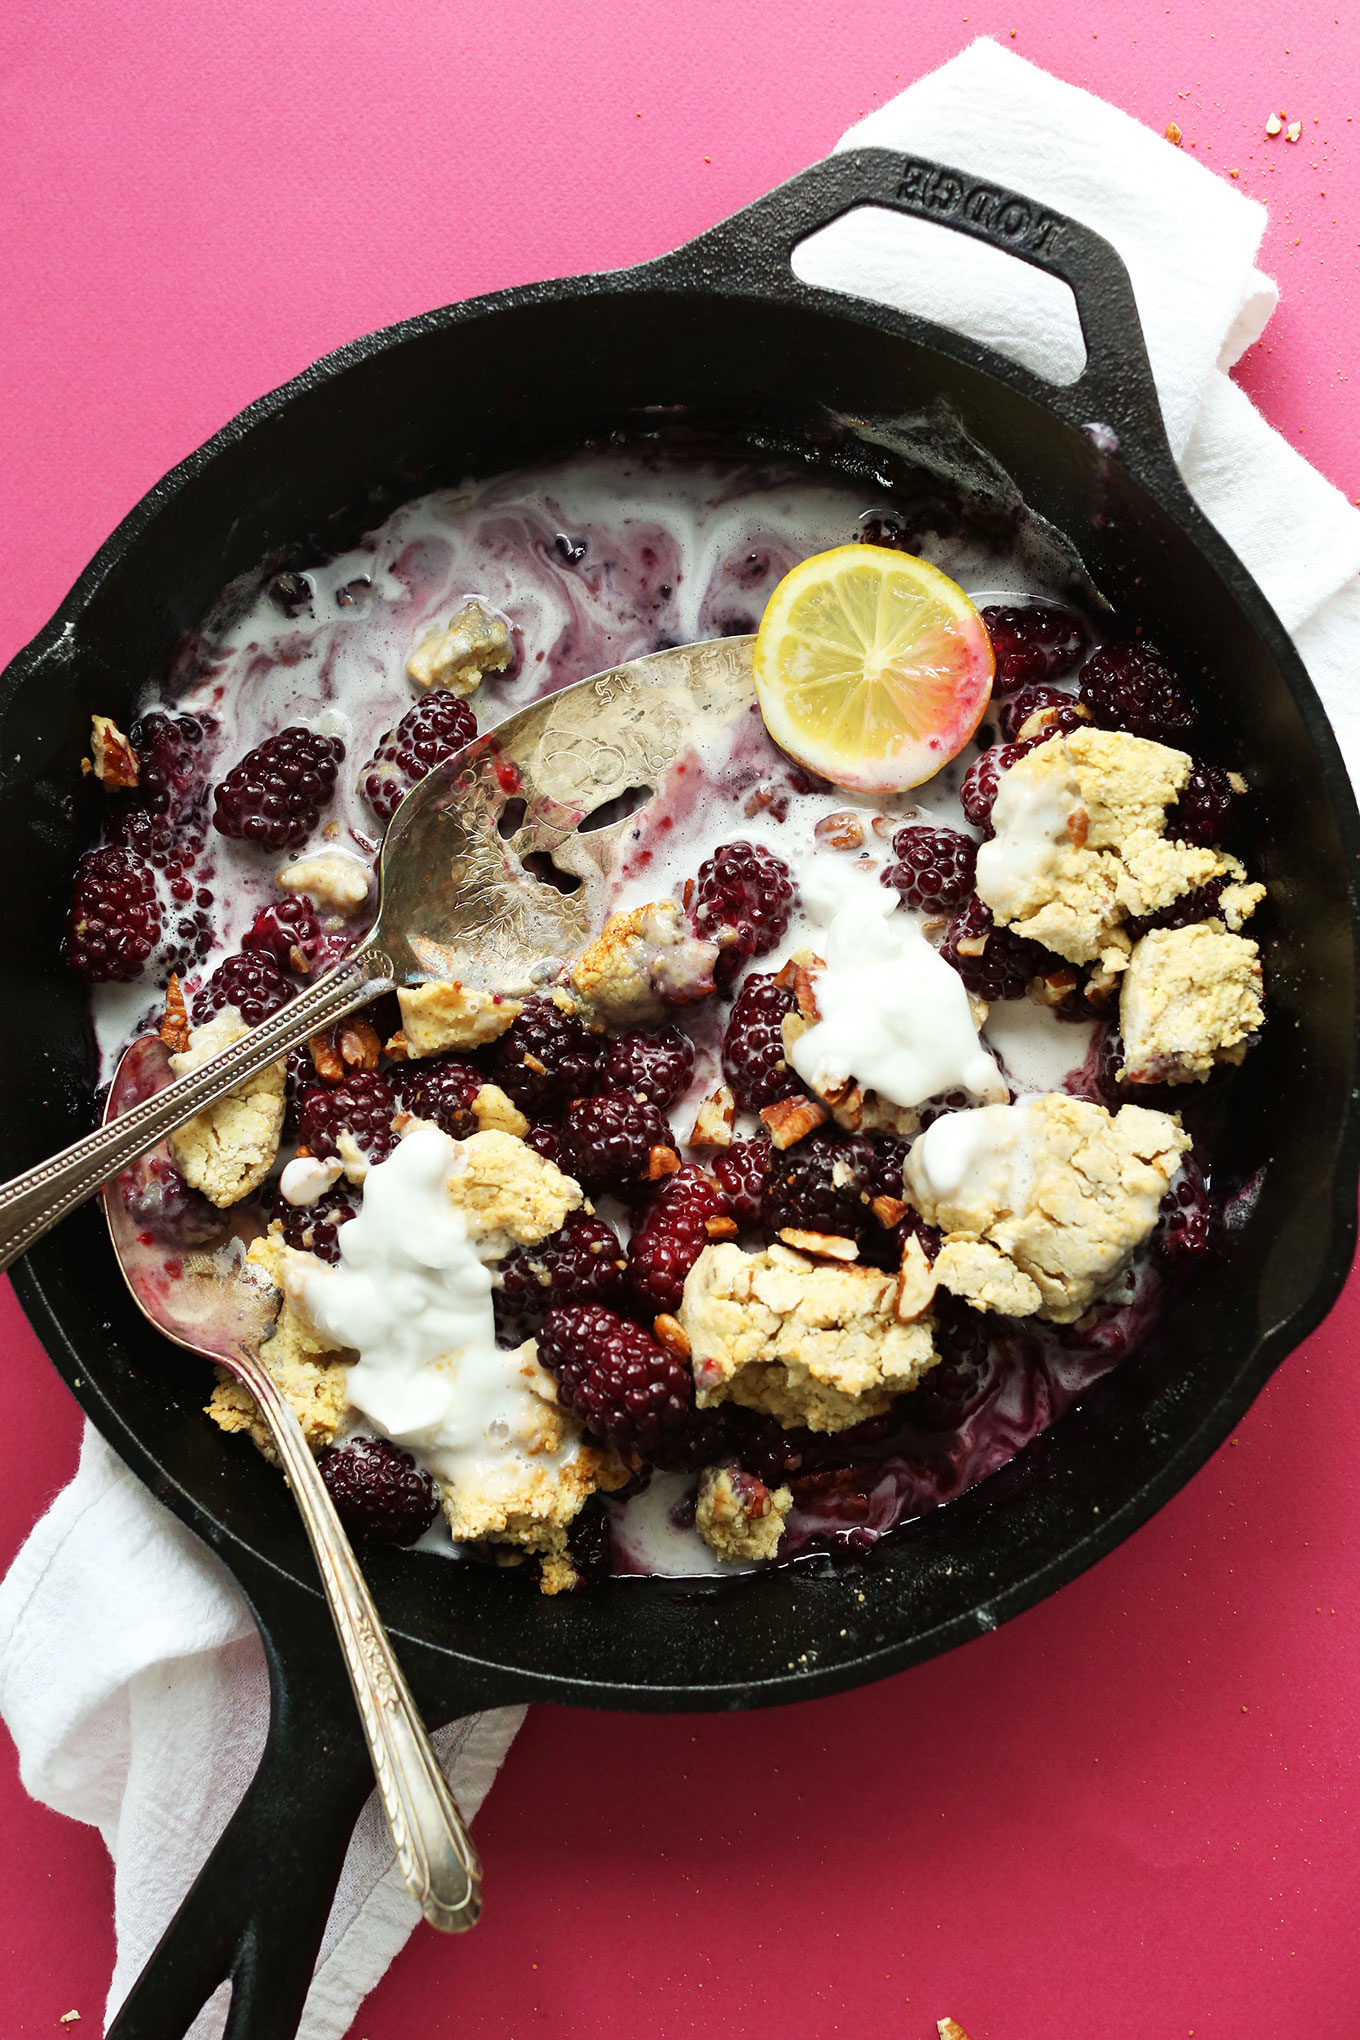 Cast-iron skillet filled with our delicious vegan Blackberry Cobbler recipe